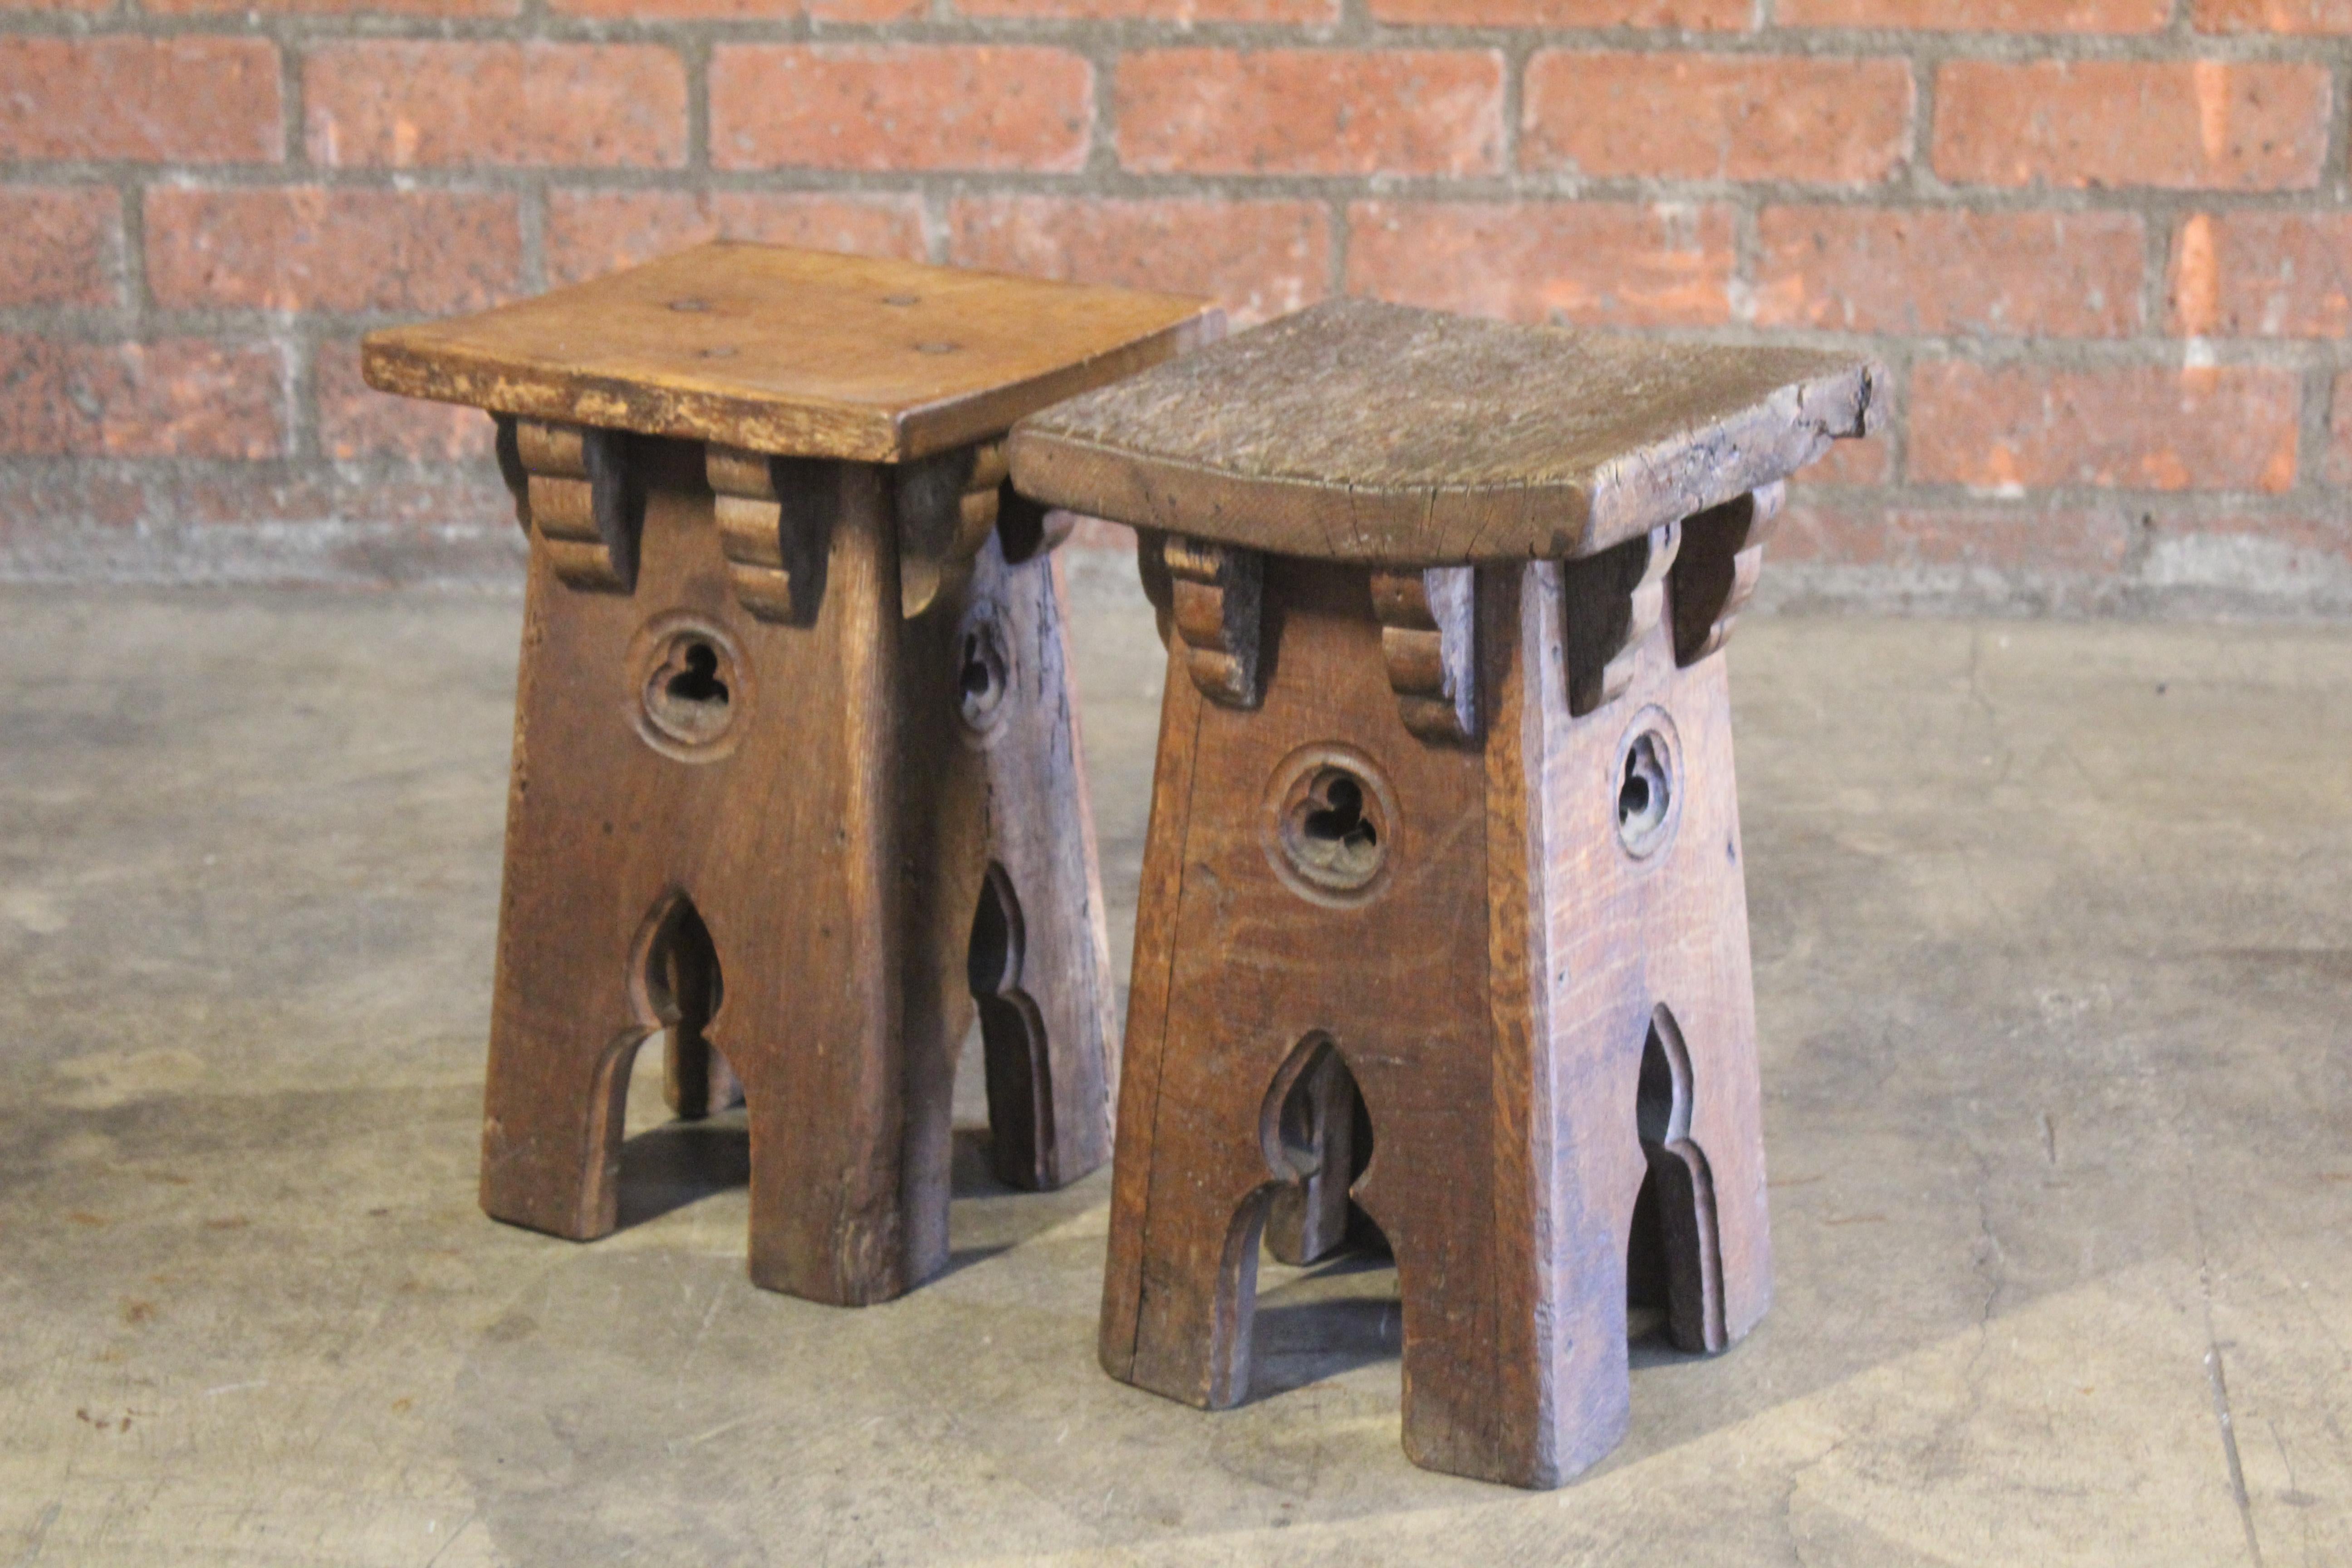 Pair of antique Gothic Revival French stools in oak. The pair are in good condition with signs of wear, appropriate with the age of the stools. Sold as a pair.